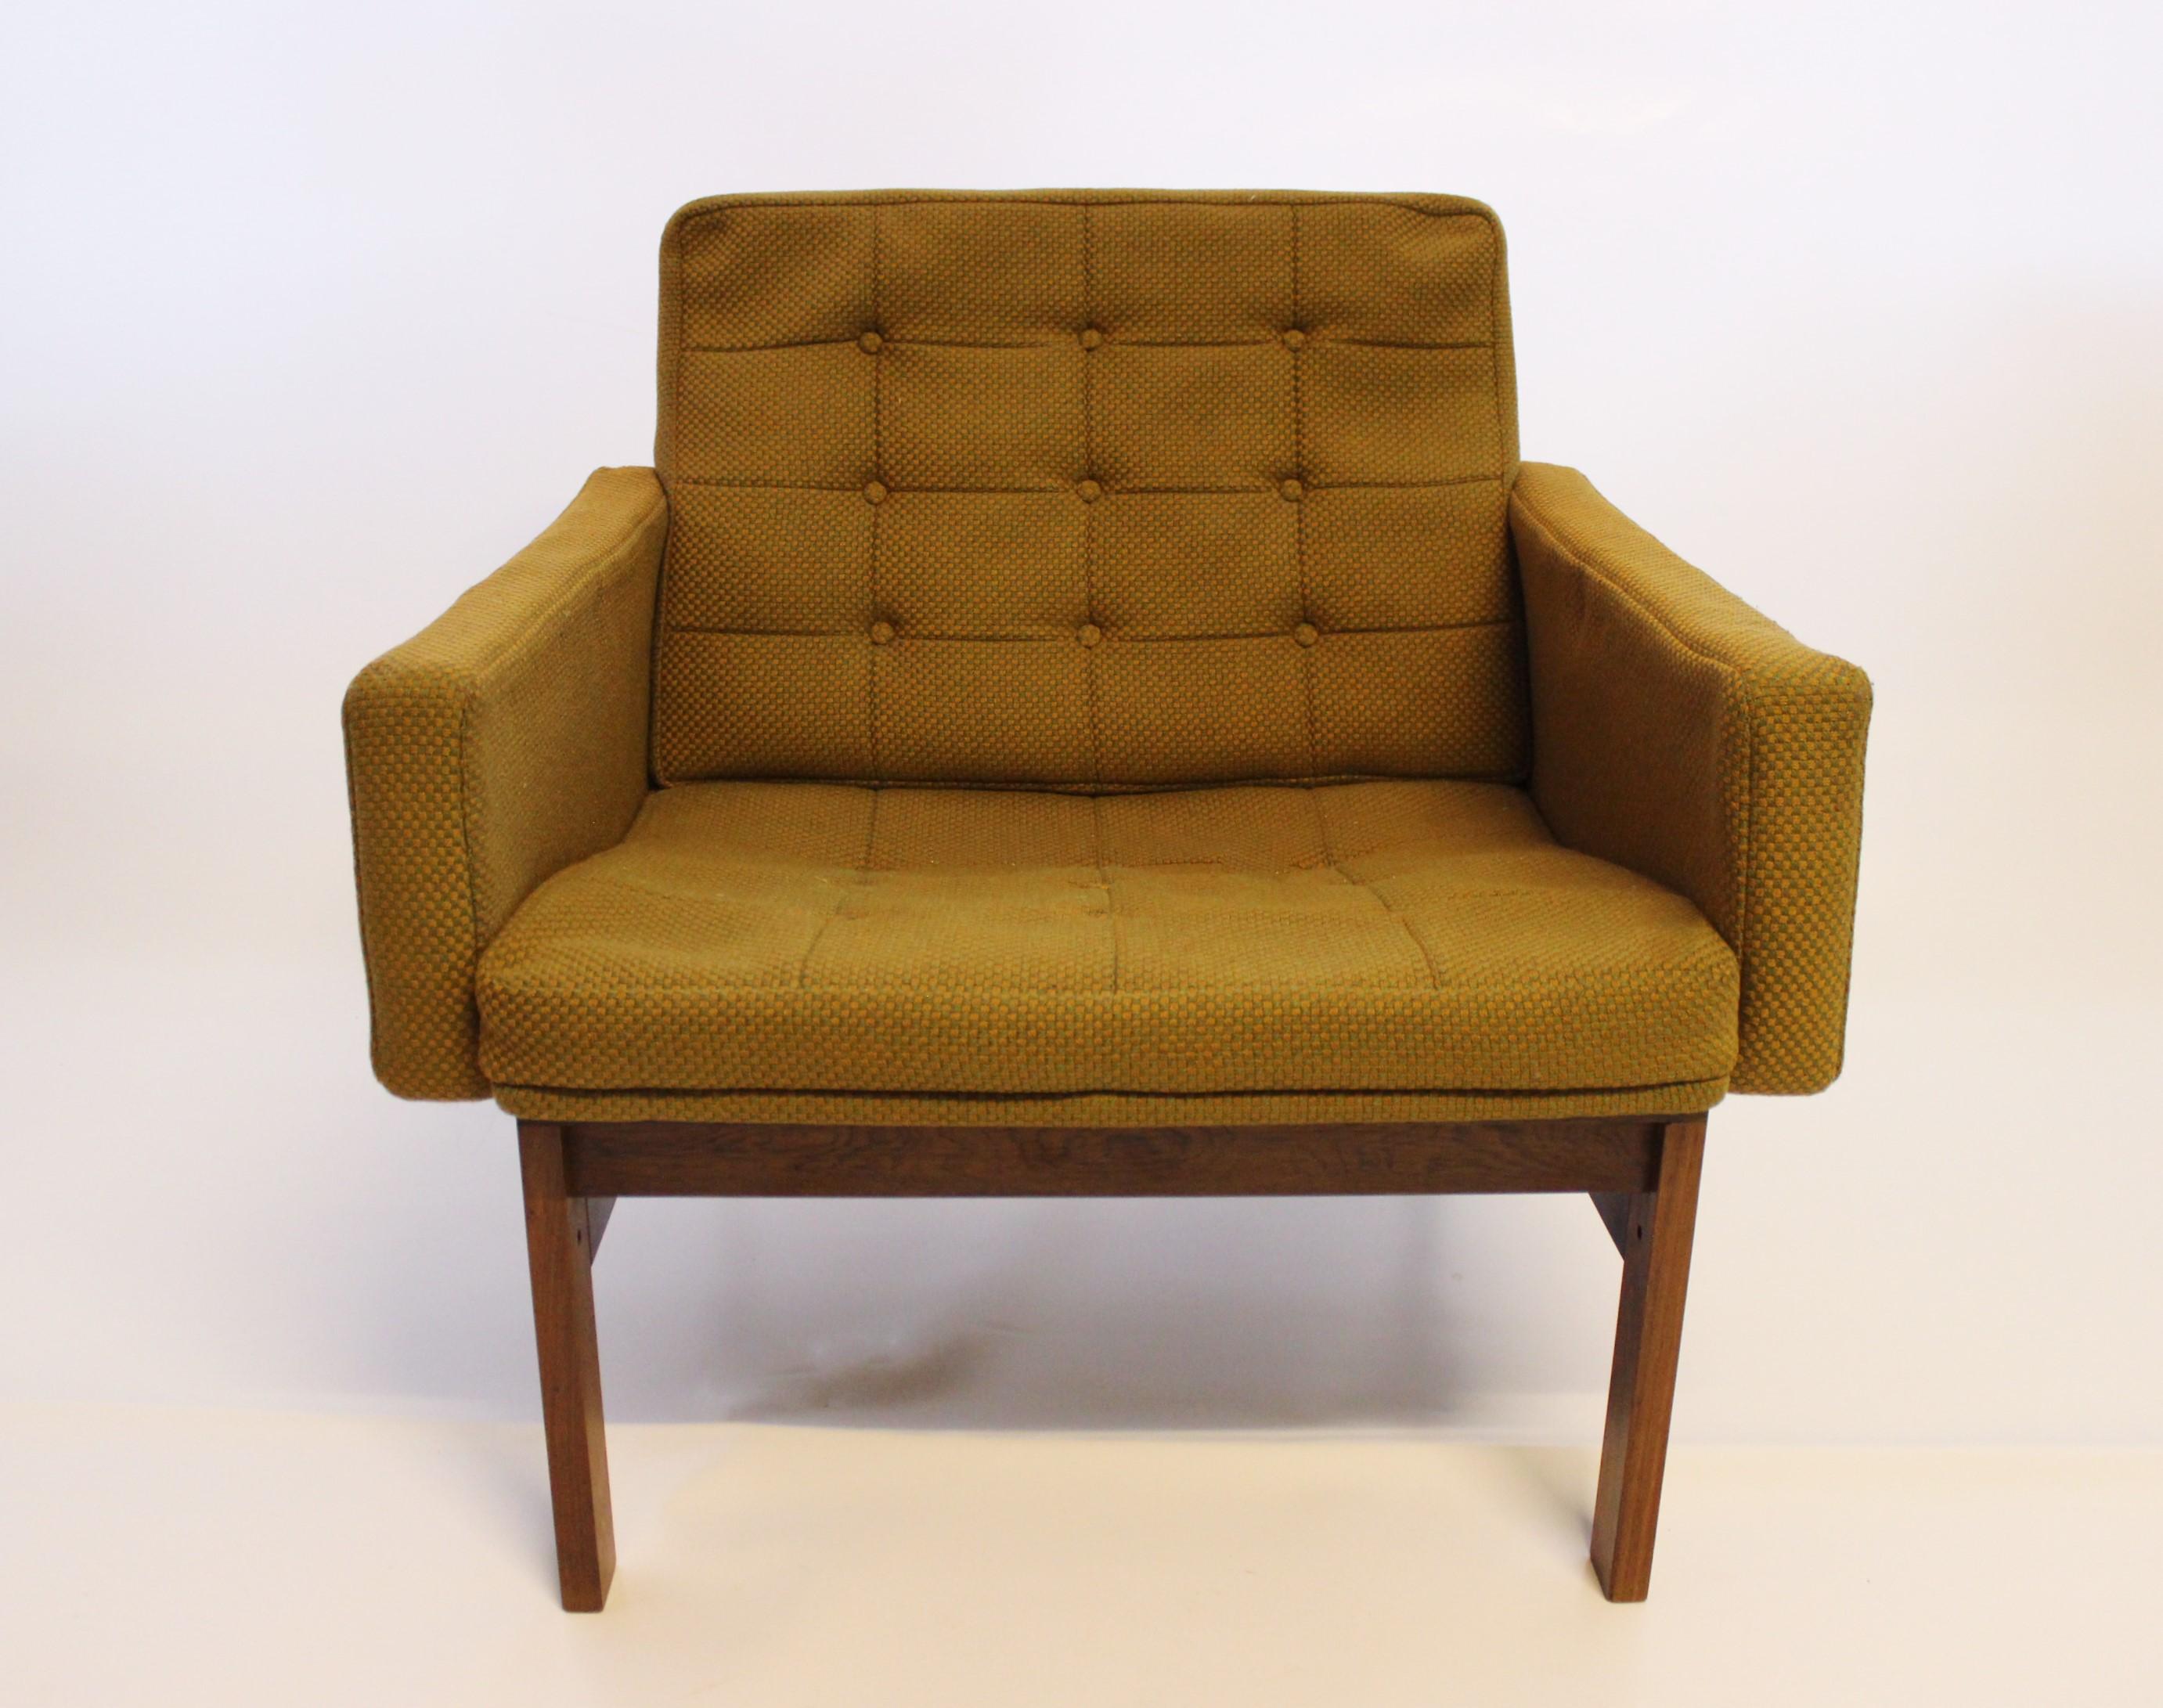 A pair of easy chairs upholstered in dark green fabric and with frame of rosewood designed by Ole Gjerlov Knudsen and Torben Lind, manufactured by France and Son. The chairs are in great vintage condition and from the 1960s.

This product will be